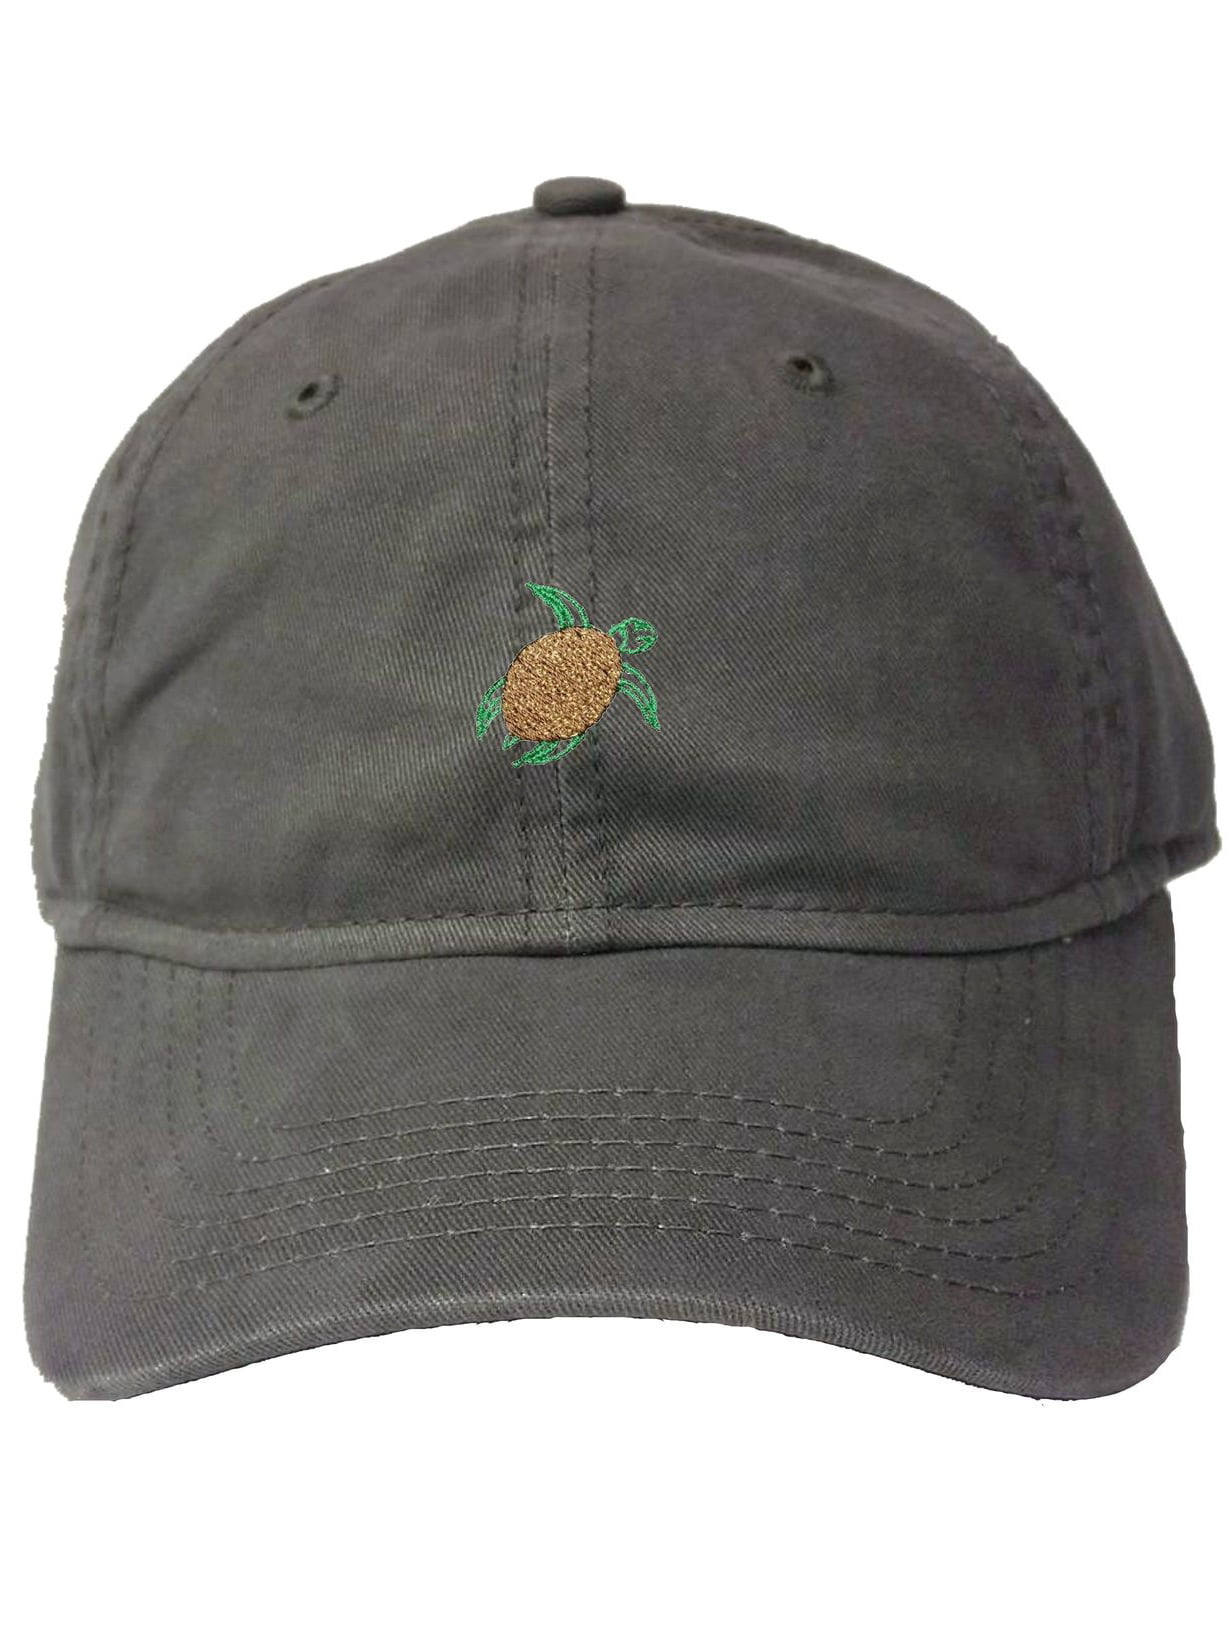 Go All Out Adult Sea Turtle Embroidered Bucket Cap Dad Hat